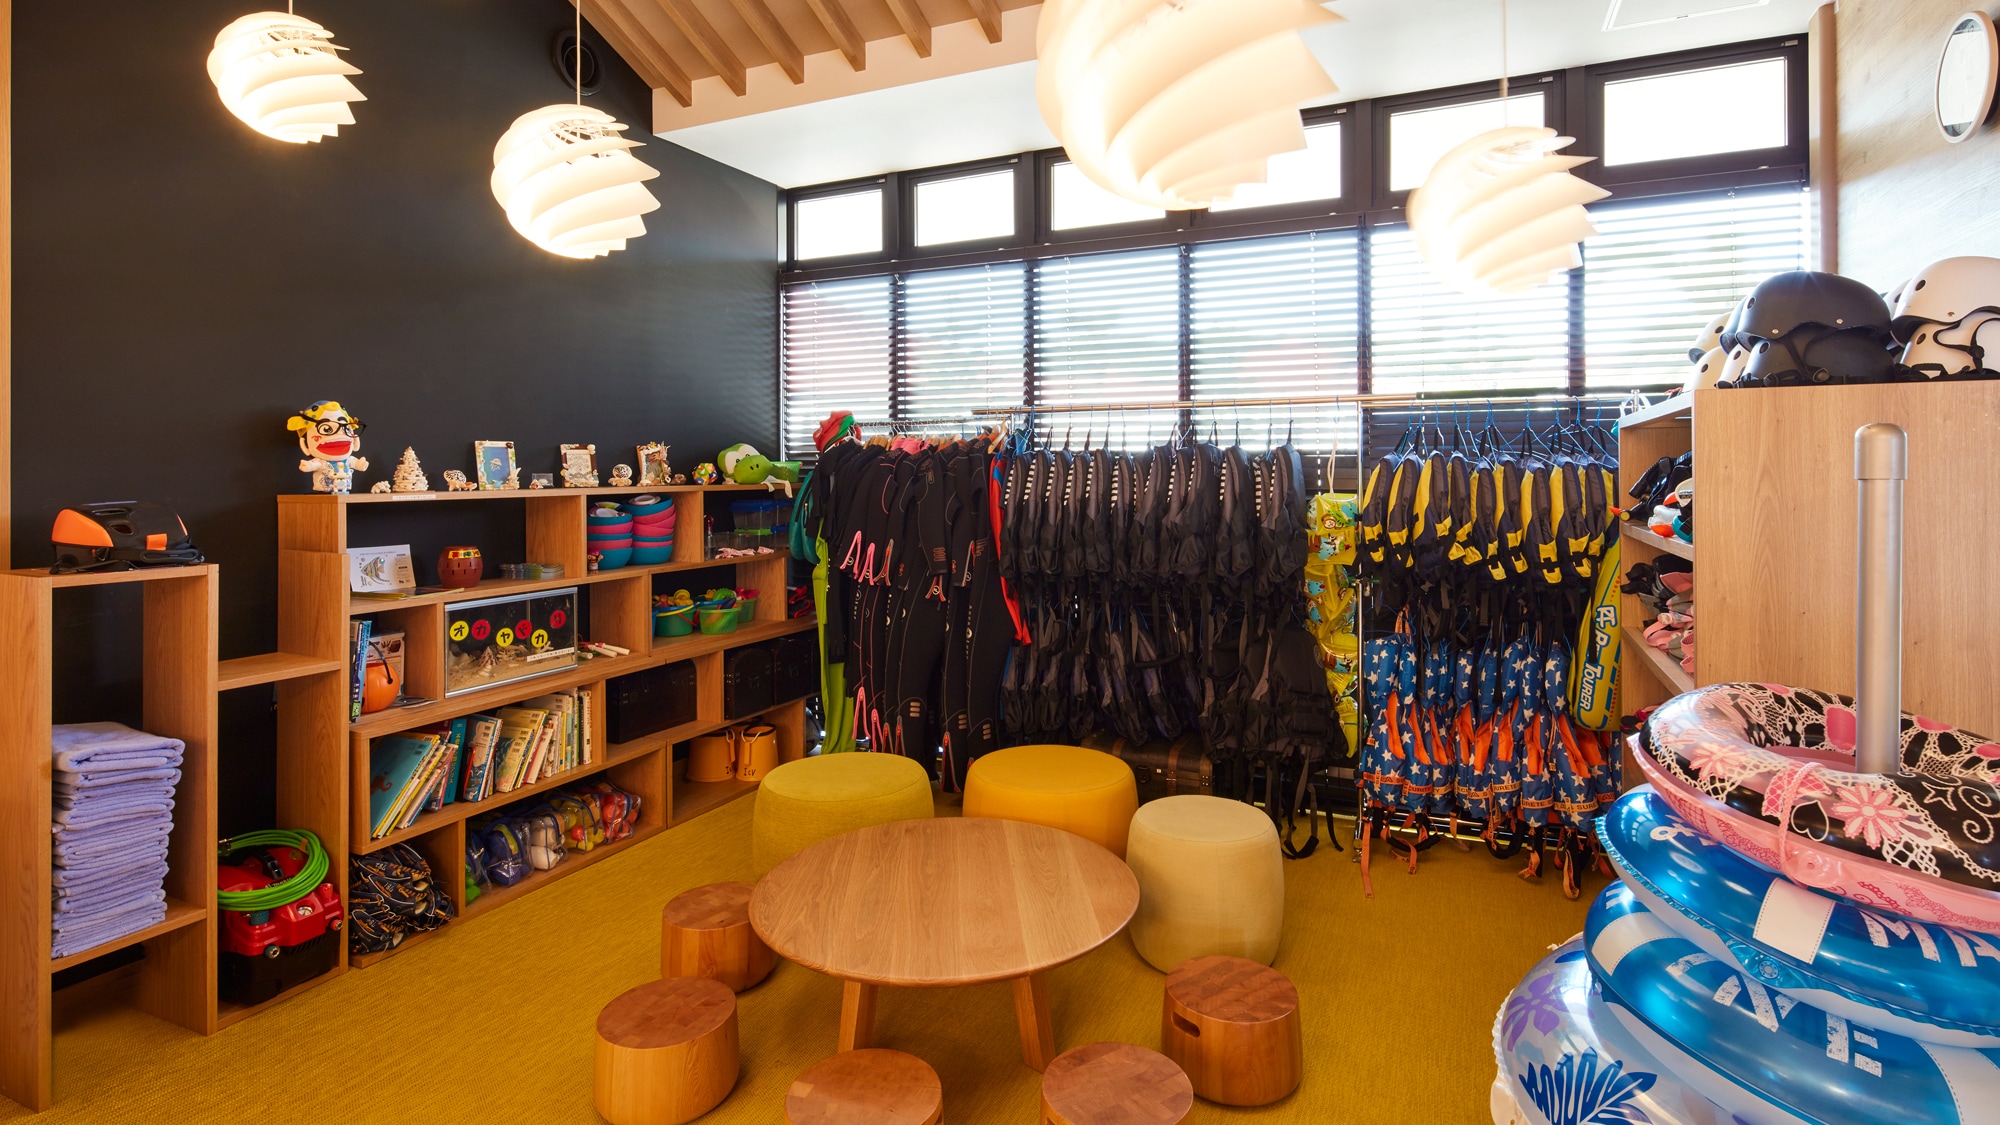 [Kids space] There are plenty of rental items for children.